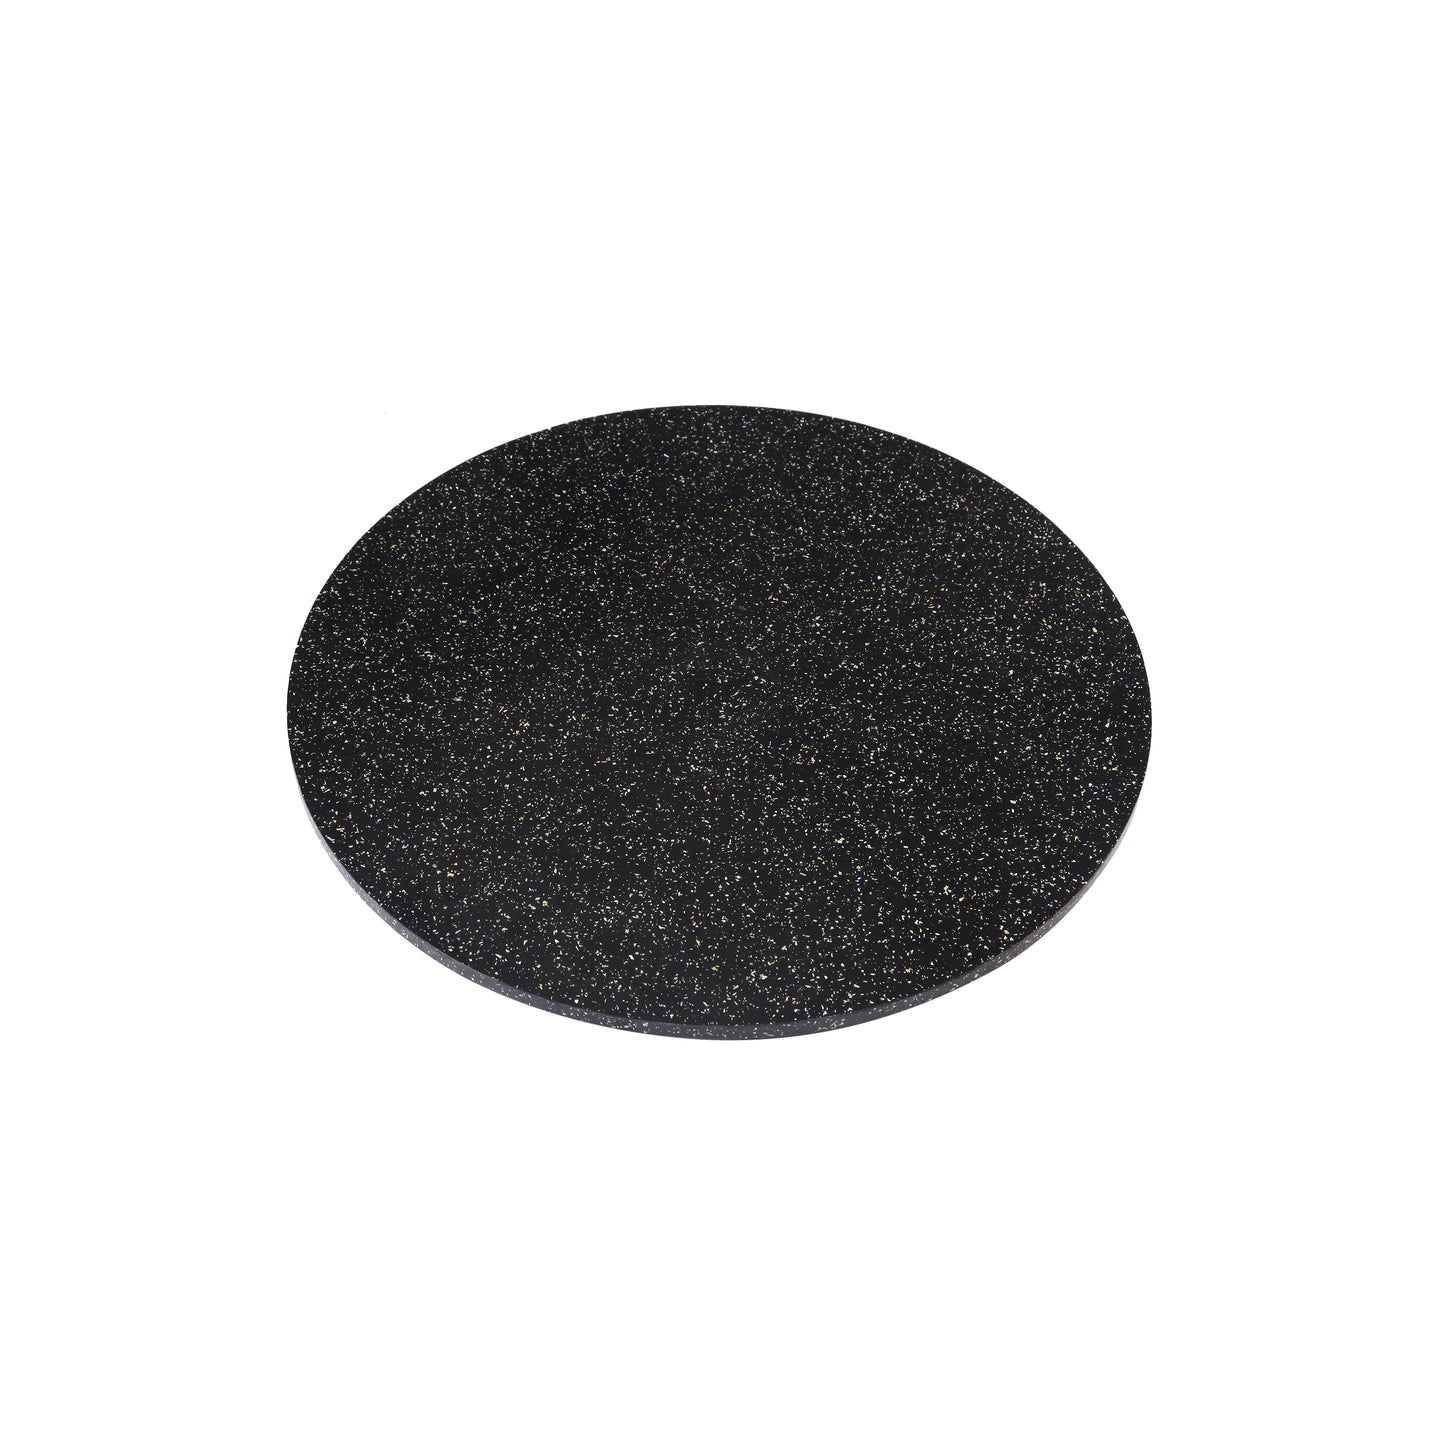 A Tiny Mistake Black Granite Wooden Table Turner, Dining Table Organisation, Lazy Susan for Dining Room Decor